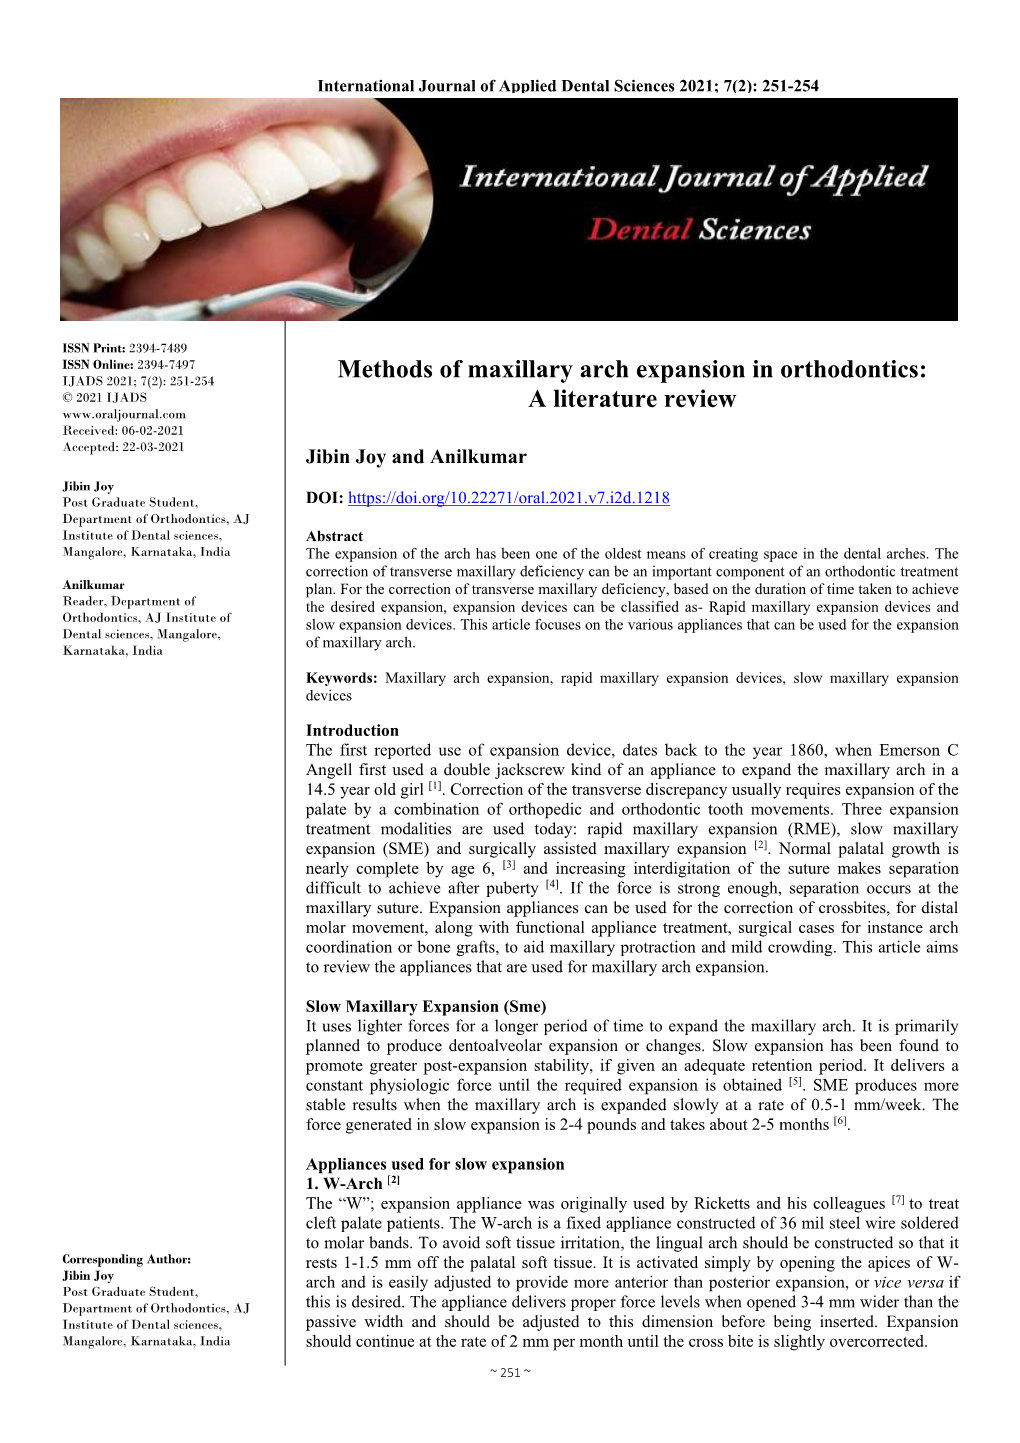 Methods of Maxillary Arch Expansion in Orthodontics: a Literature Review